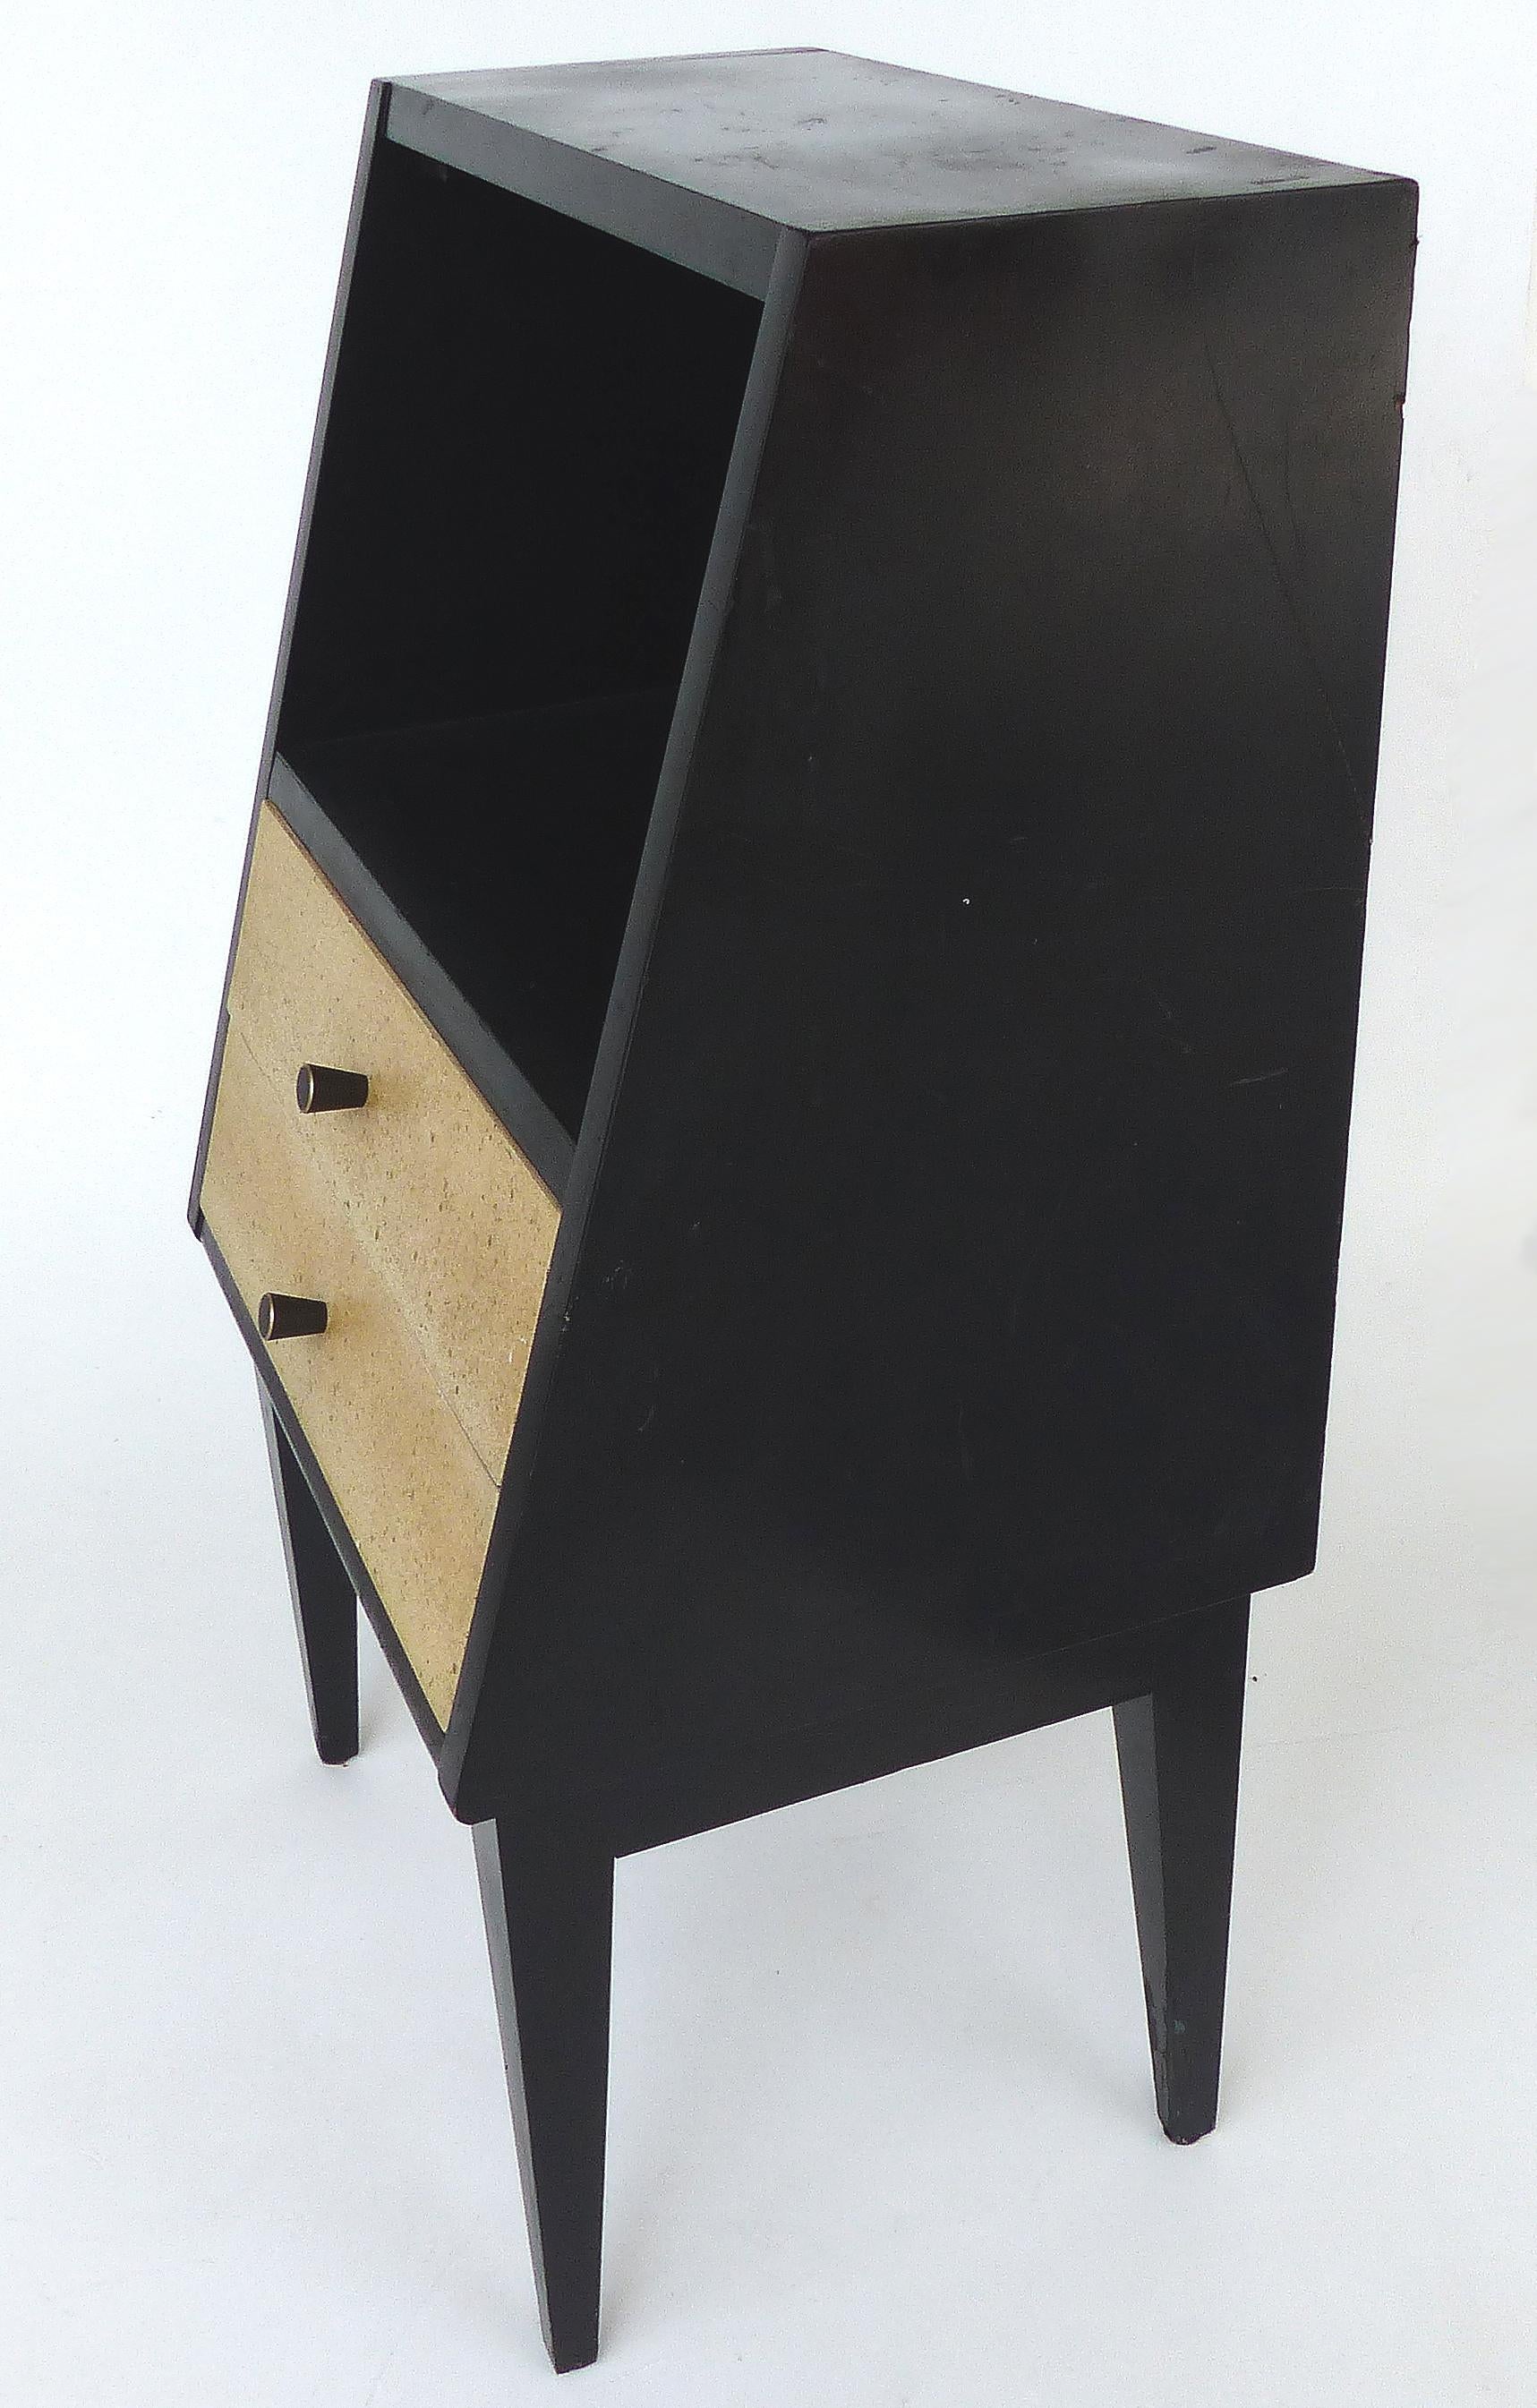 telephone stands with drawers